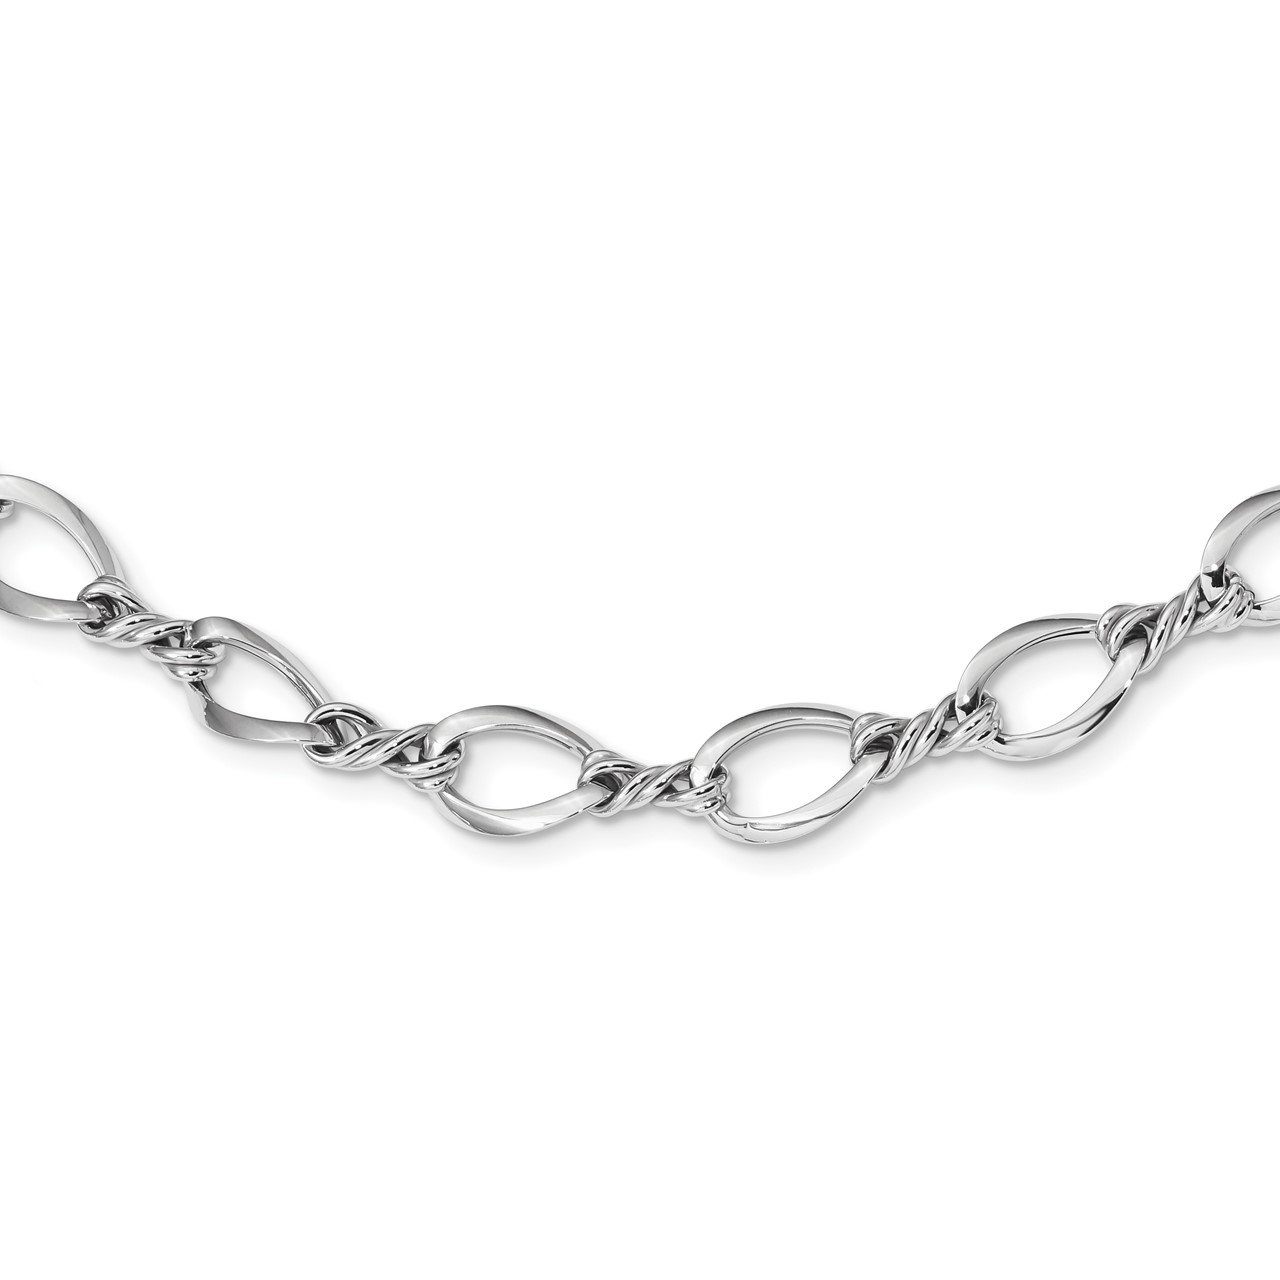 14k White Gold Fancy Link 18in Necklace